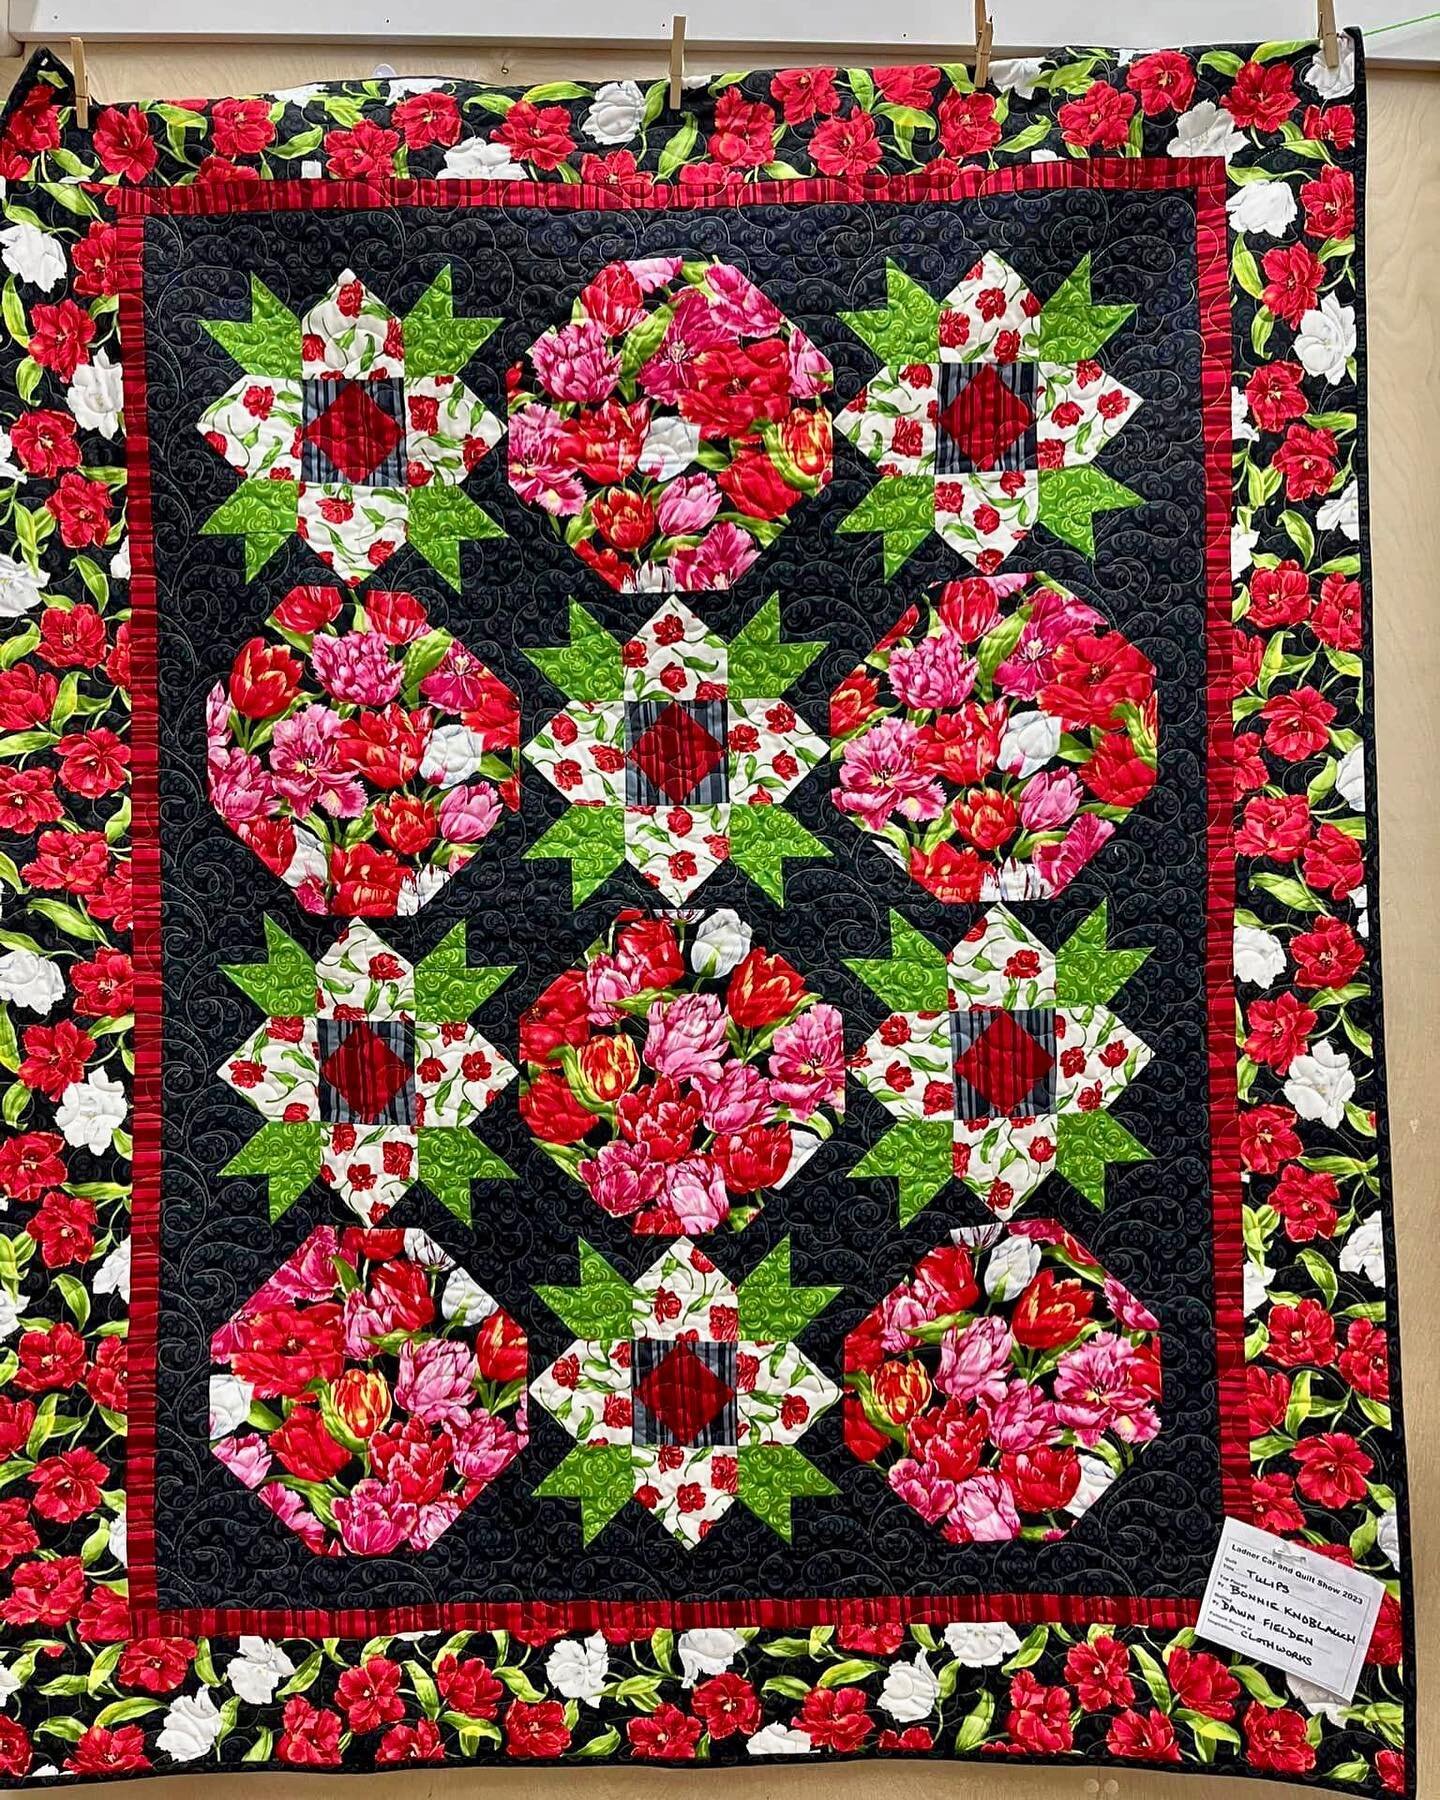 From the quilt and car show weekend.  Beautiful tulip quilt pieced by Bonnie K, with longarm quilting by Dawn F. ❤️

#boundarybayquiltersguild #tulipsofinstagram #quilts #quiltingfun #sewjoy #isew #canadianquilter #quilting